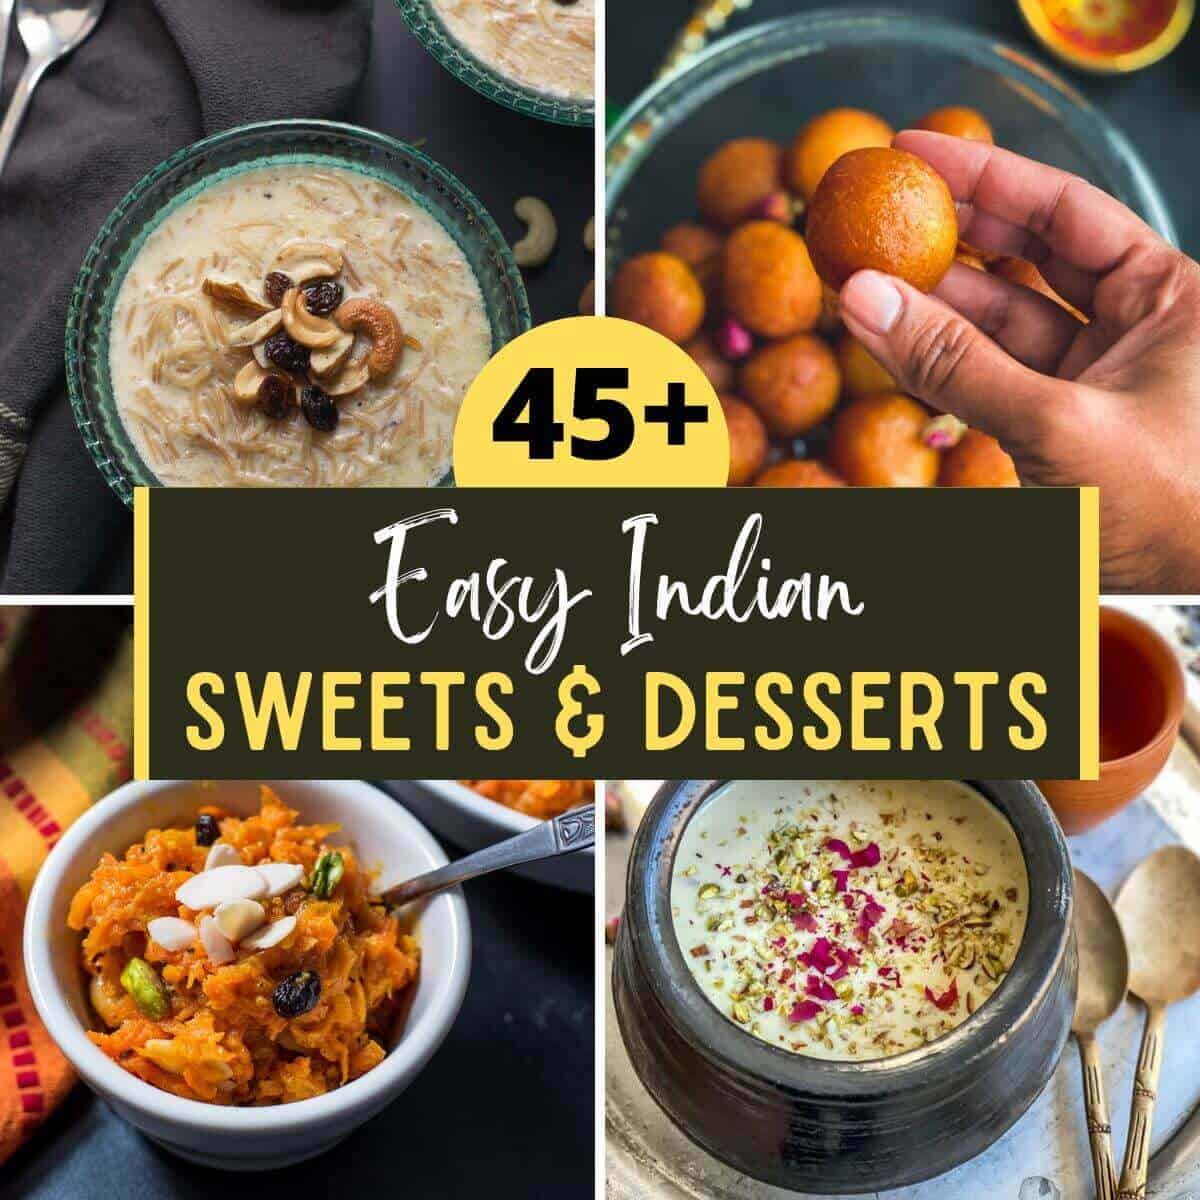 45+ Easy Indian Sweets and Desserts that are a must-try